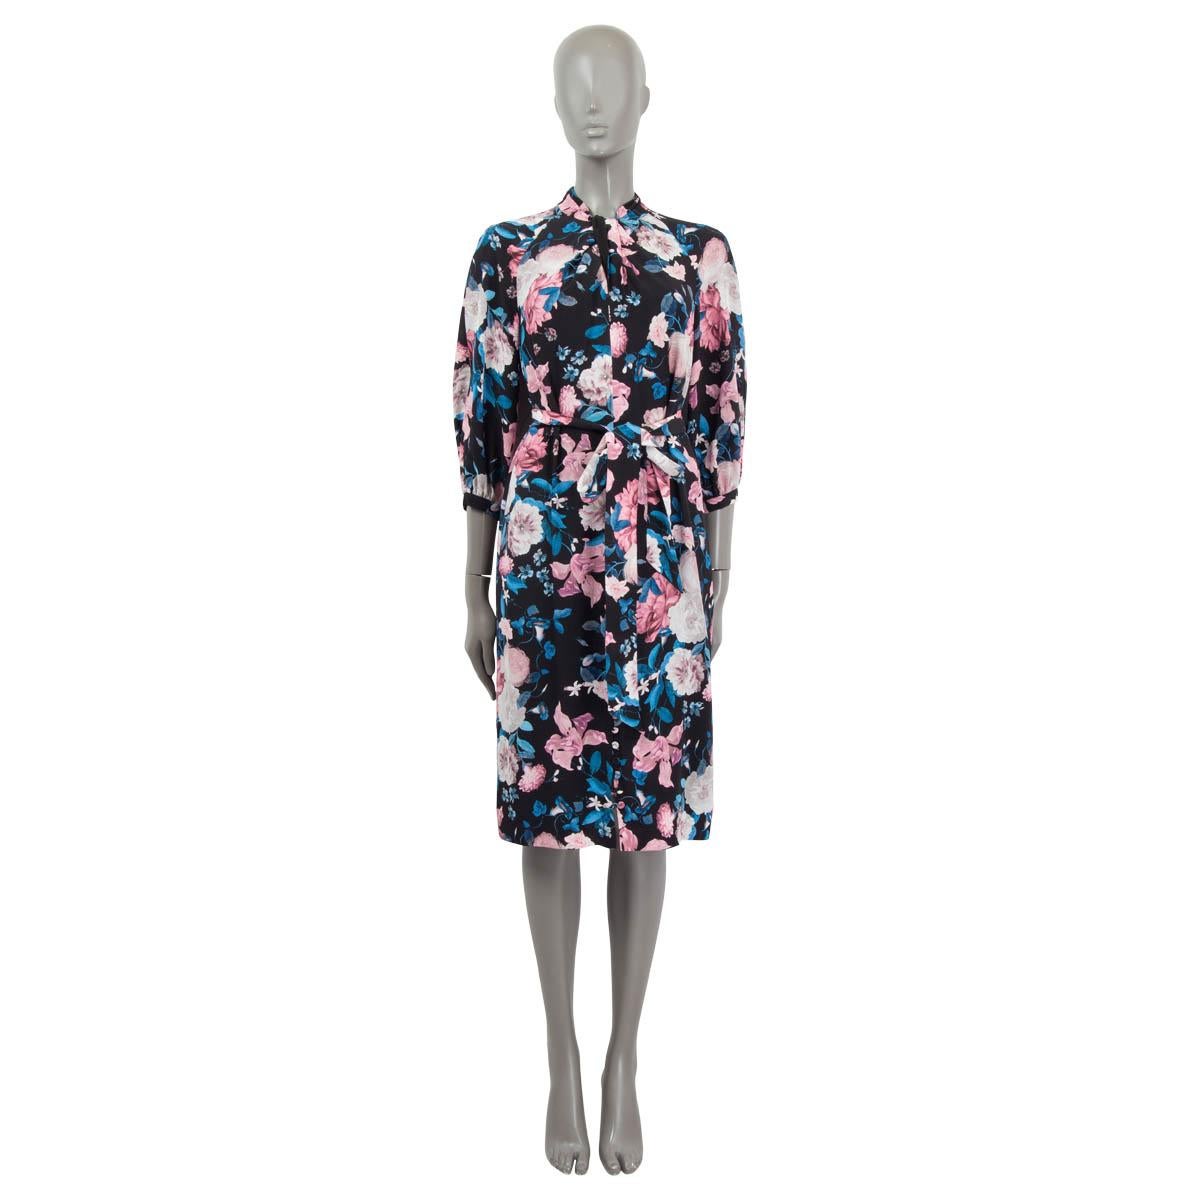 100% authentic Erdem 'Finnetta' belted floral print dress in black, pink, dusty rose, navy, blue and off-white silk (100%). Features long raglan sleeves (sleeve measurements taken from the neck) and buttoned cuffs. Opens with a concealed zipper and